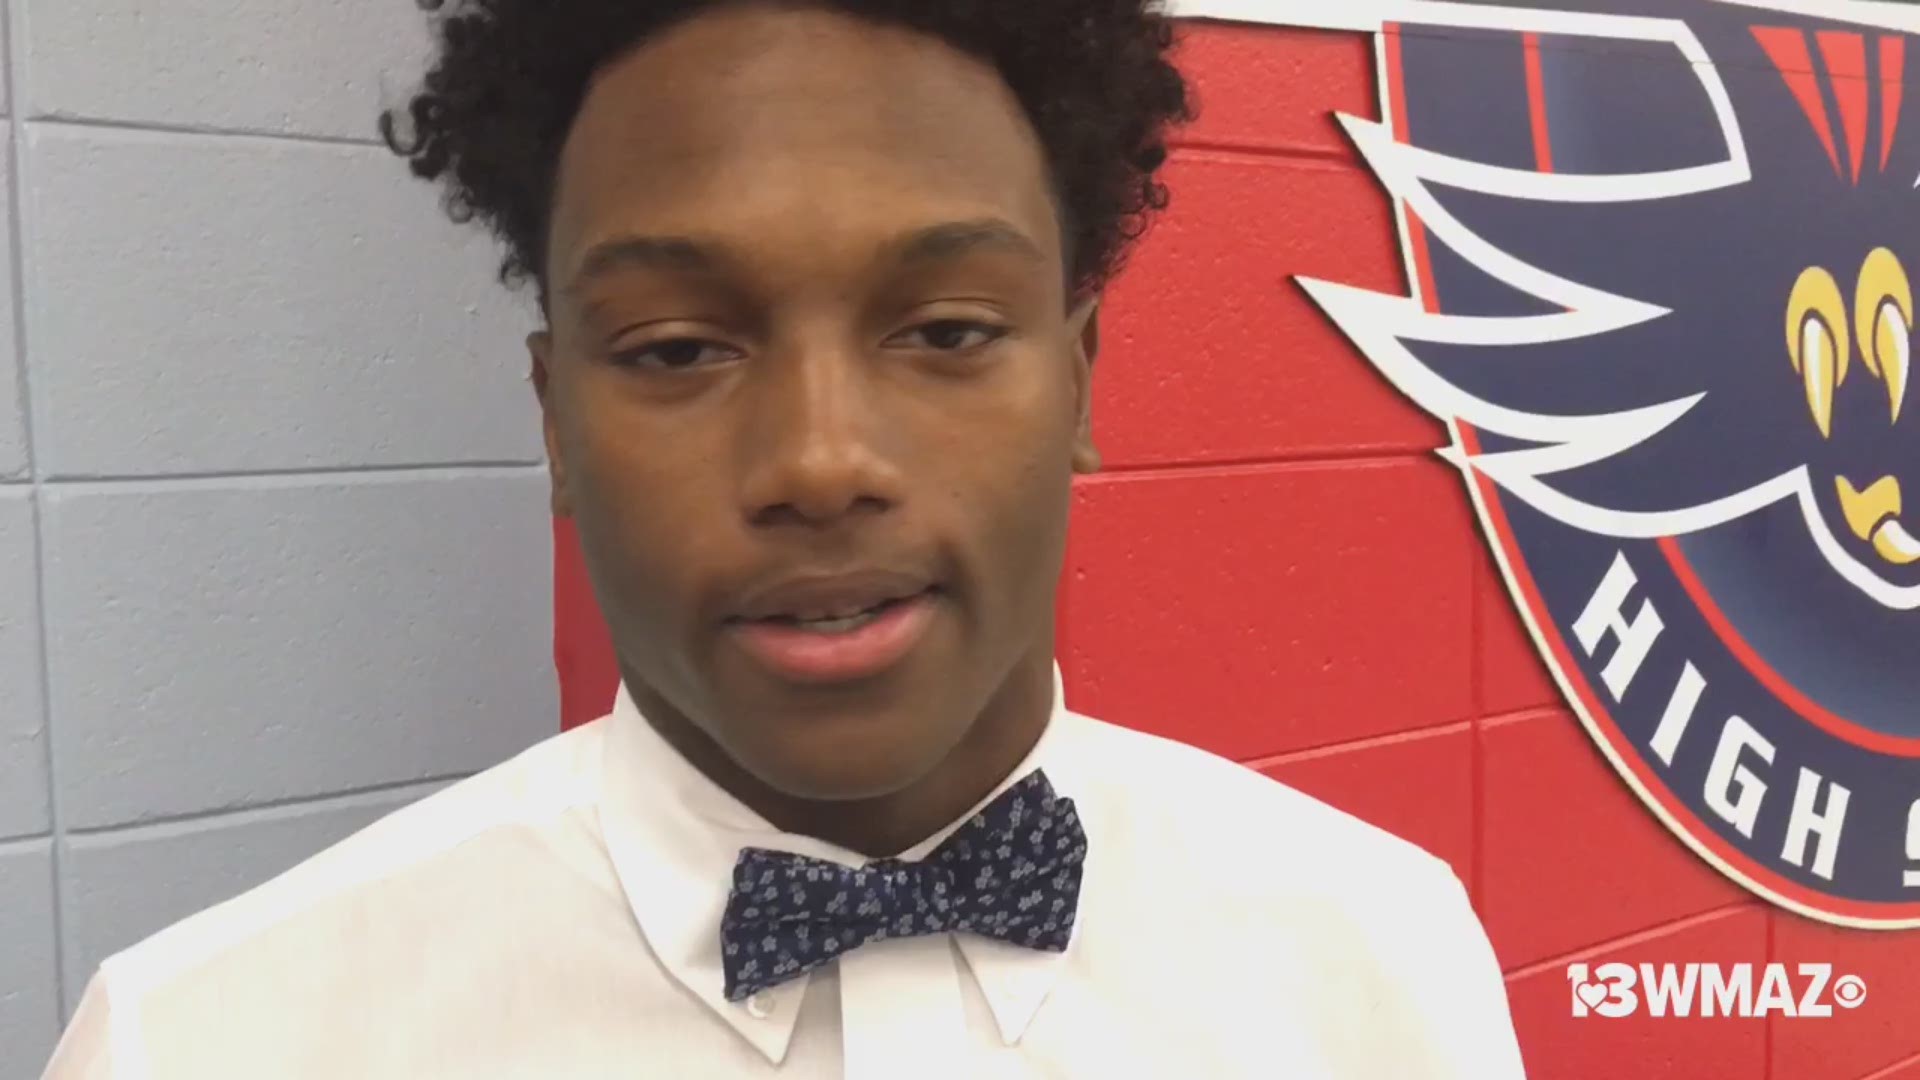 The Veterans HS senior participated in Early Signing Day and signed with Georgia Southern University in Statesboro